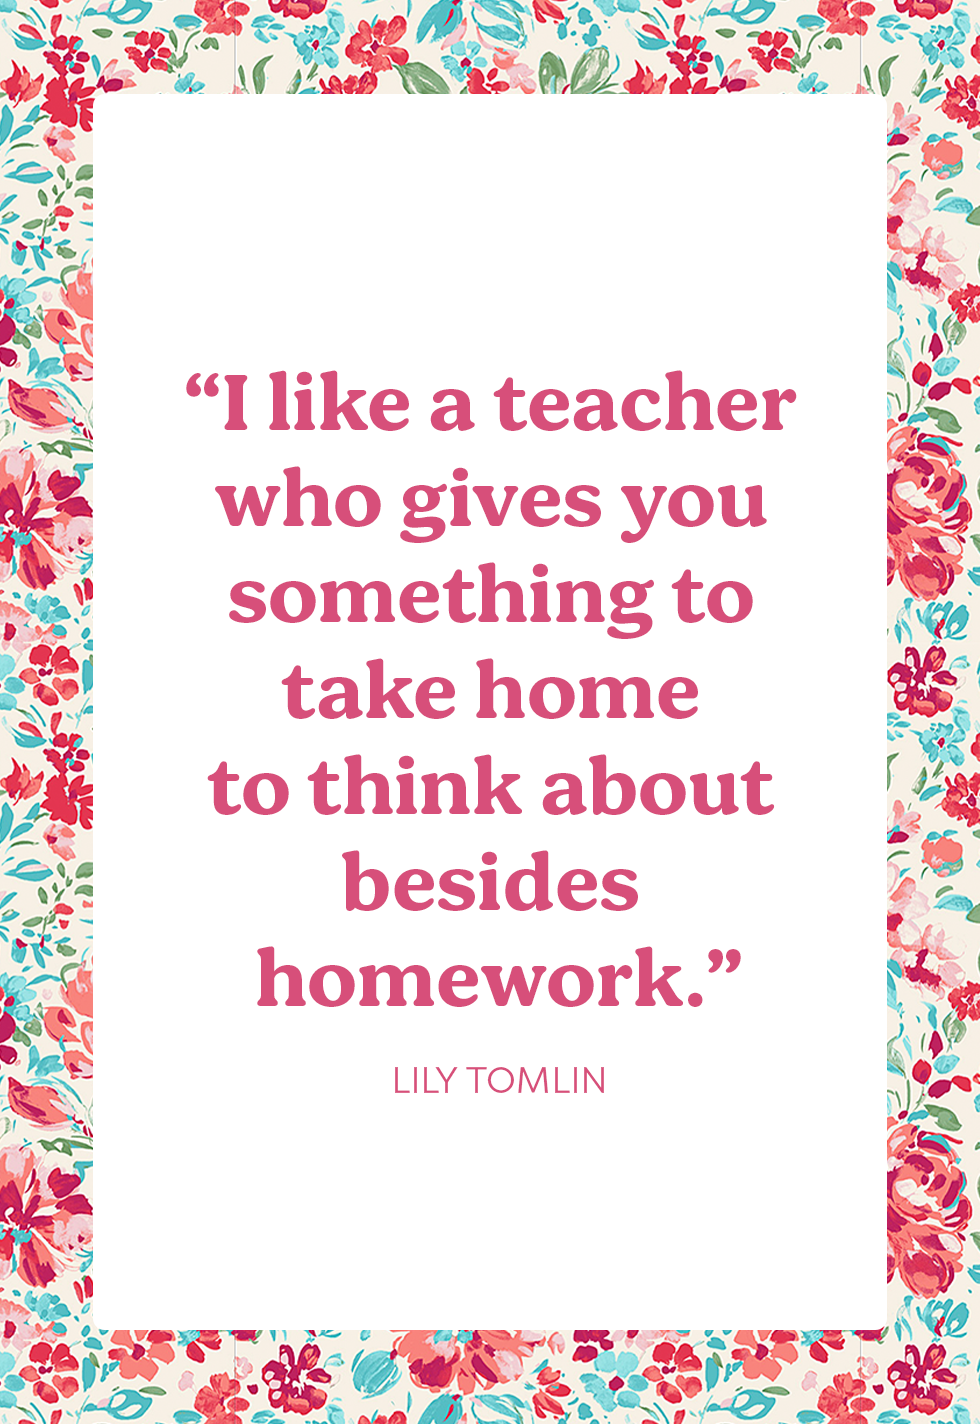 21 Back-to-School Quotes and Inspiring Sayings for Kids in School